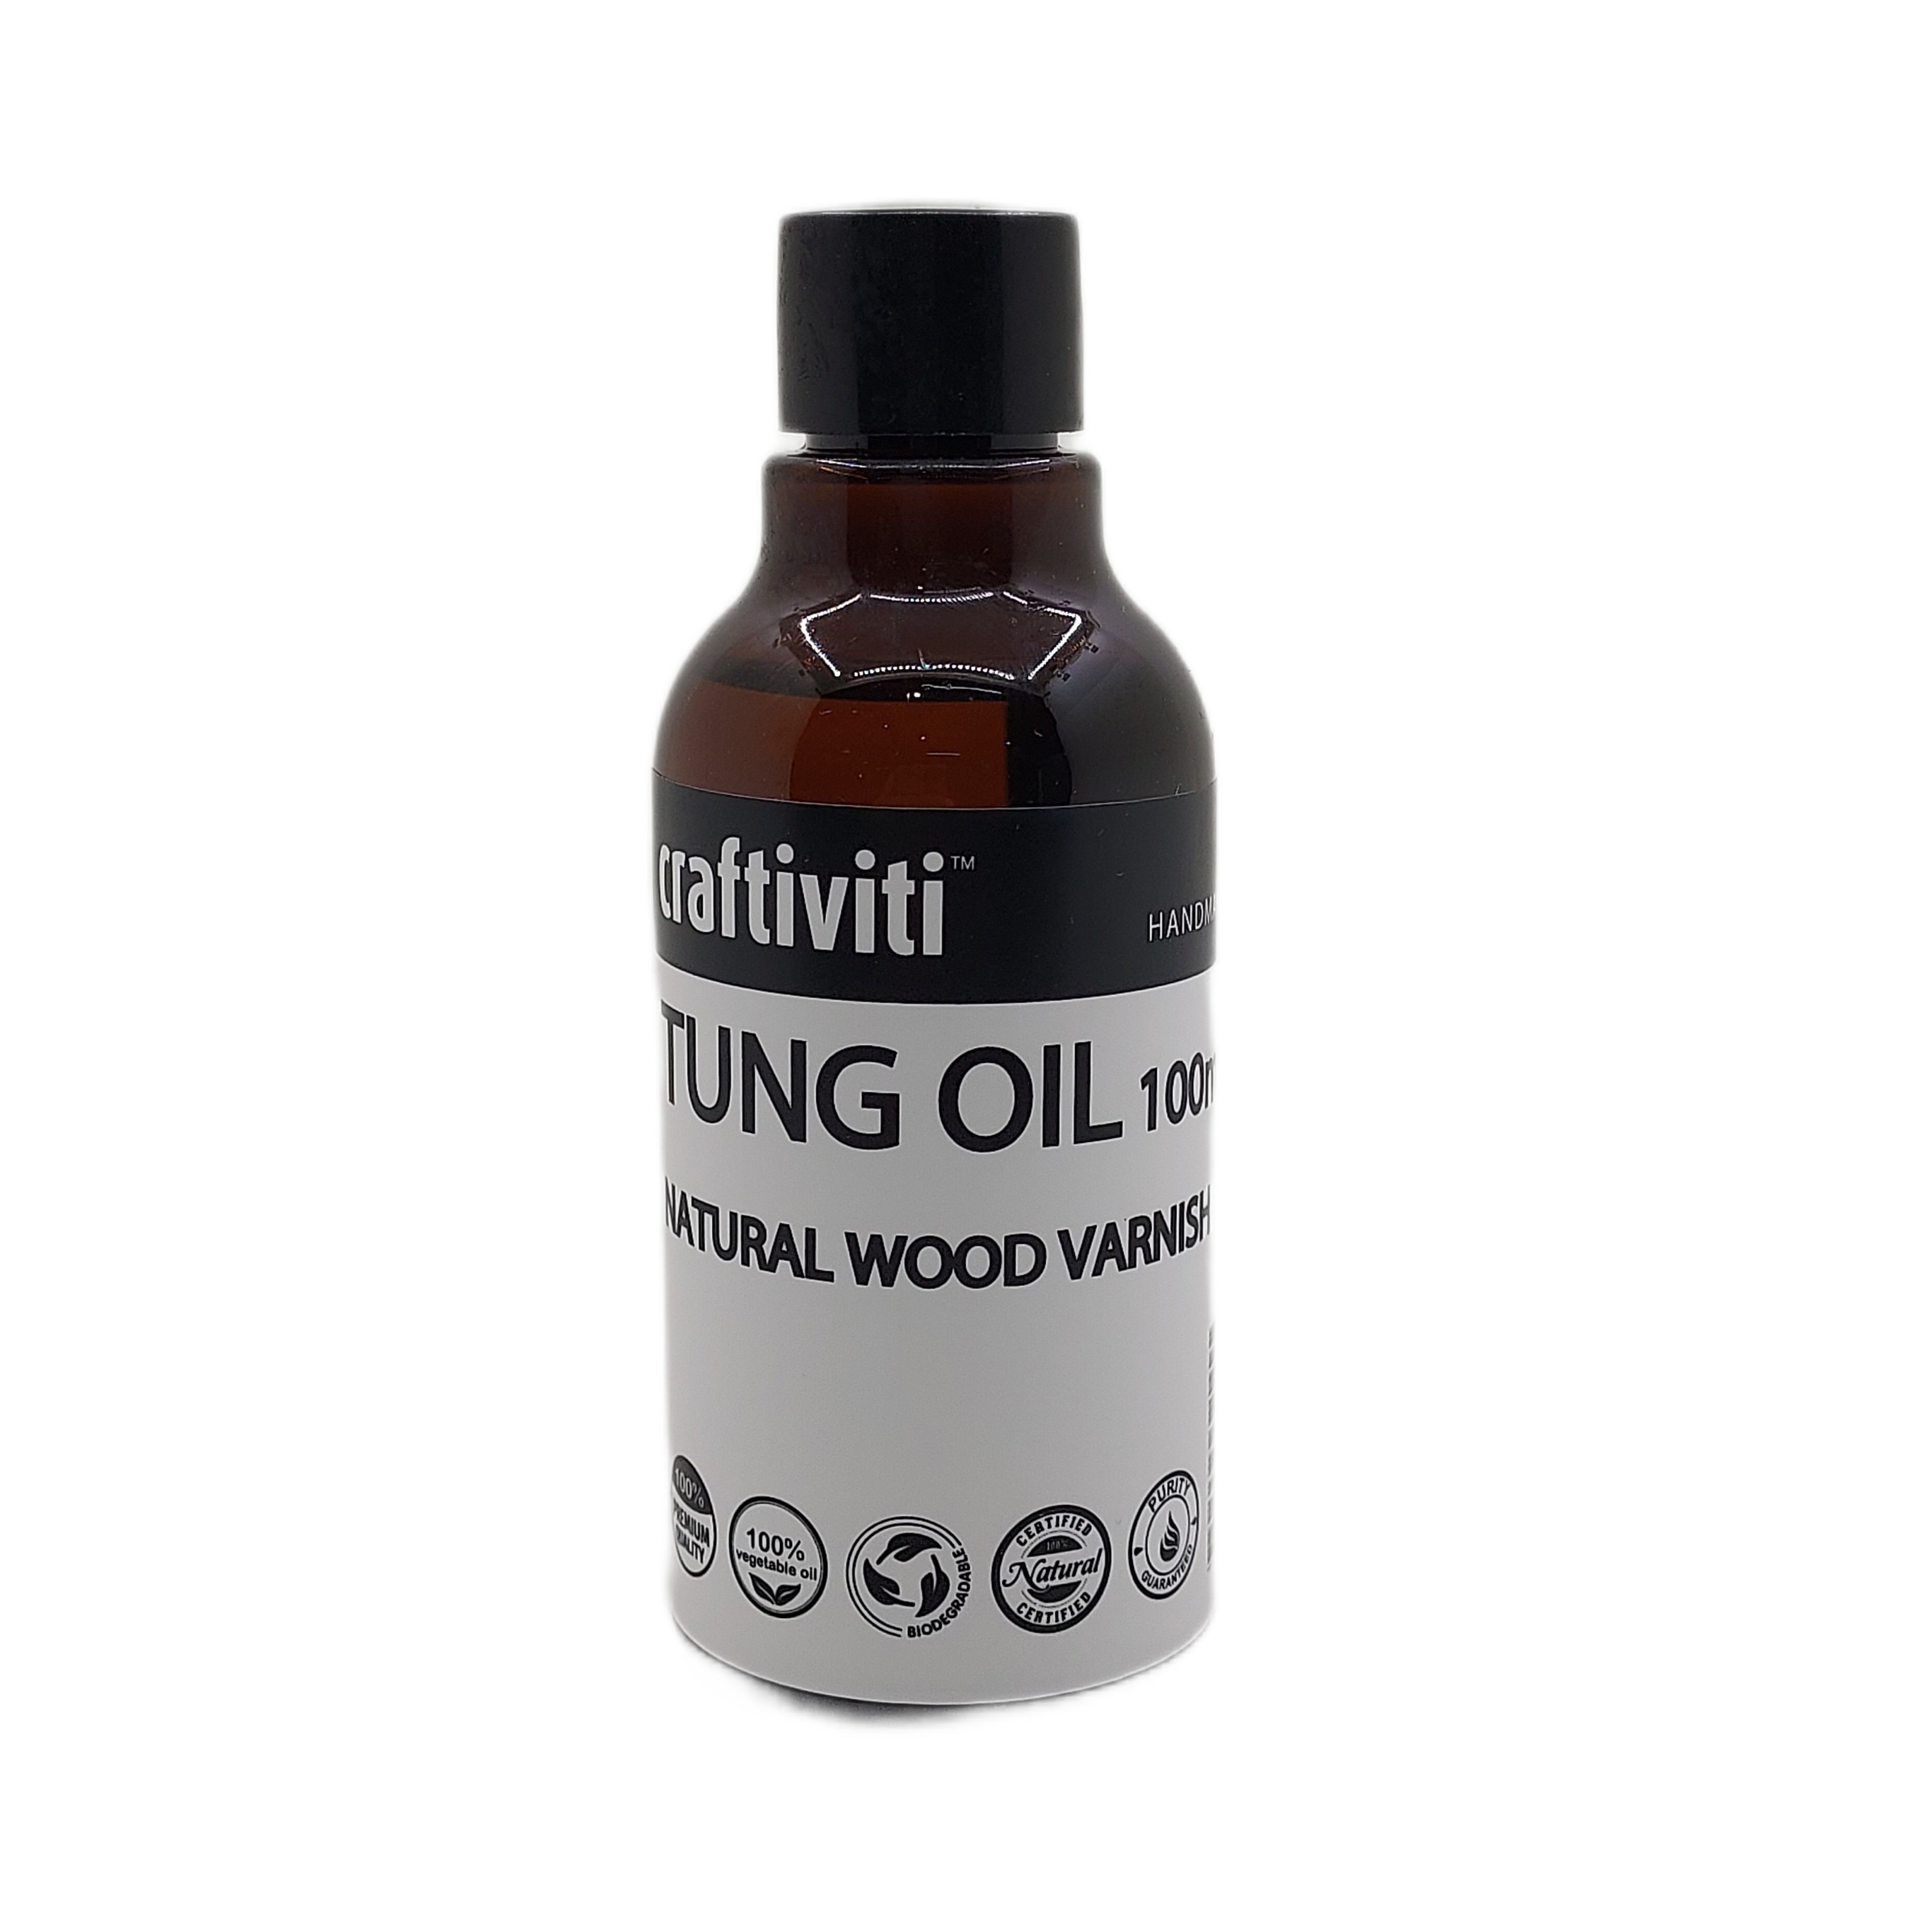 Tung Oil (China Wood Oil) - Cold Pressed 100ml Ingredients - Craftiviti